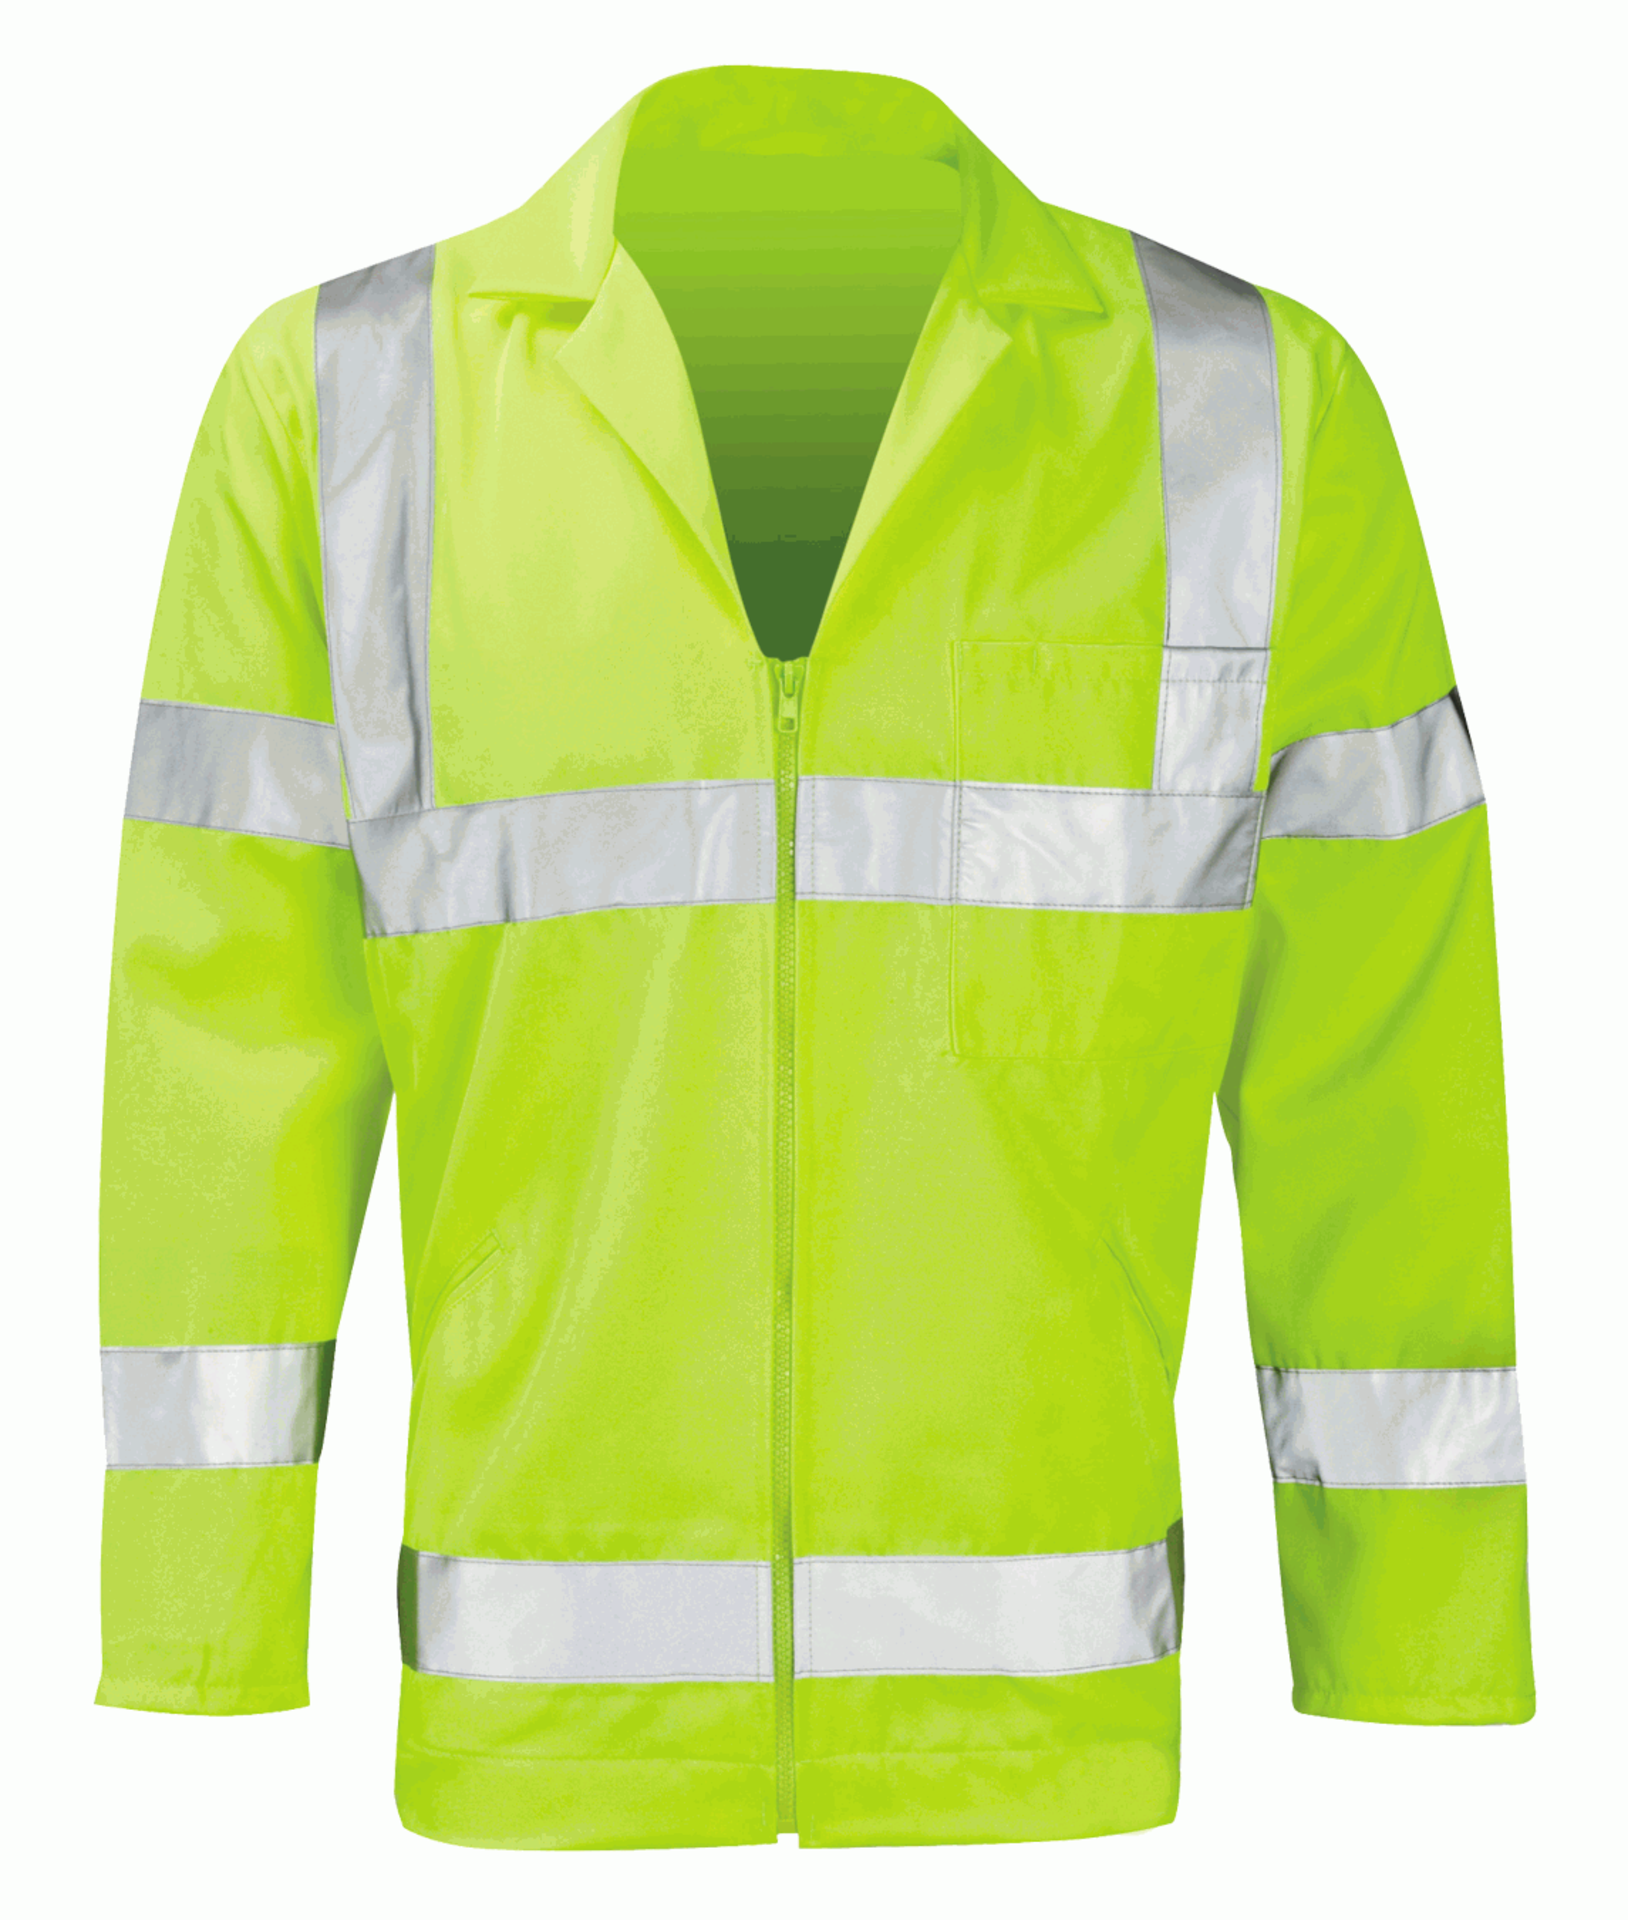 Hercules Durable Workwear high vis jacket, size M, new and packaged.